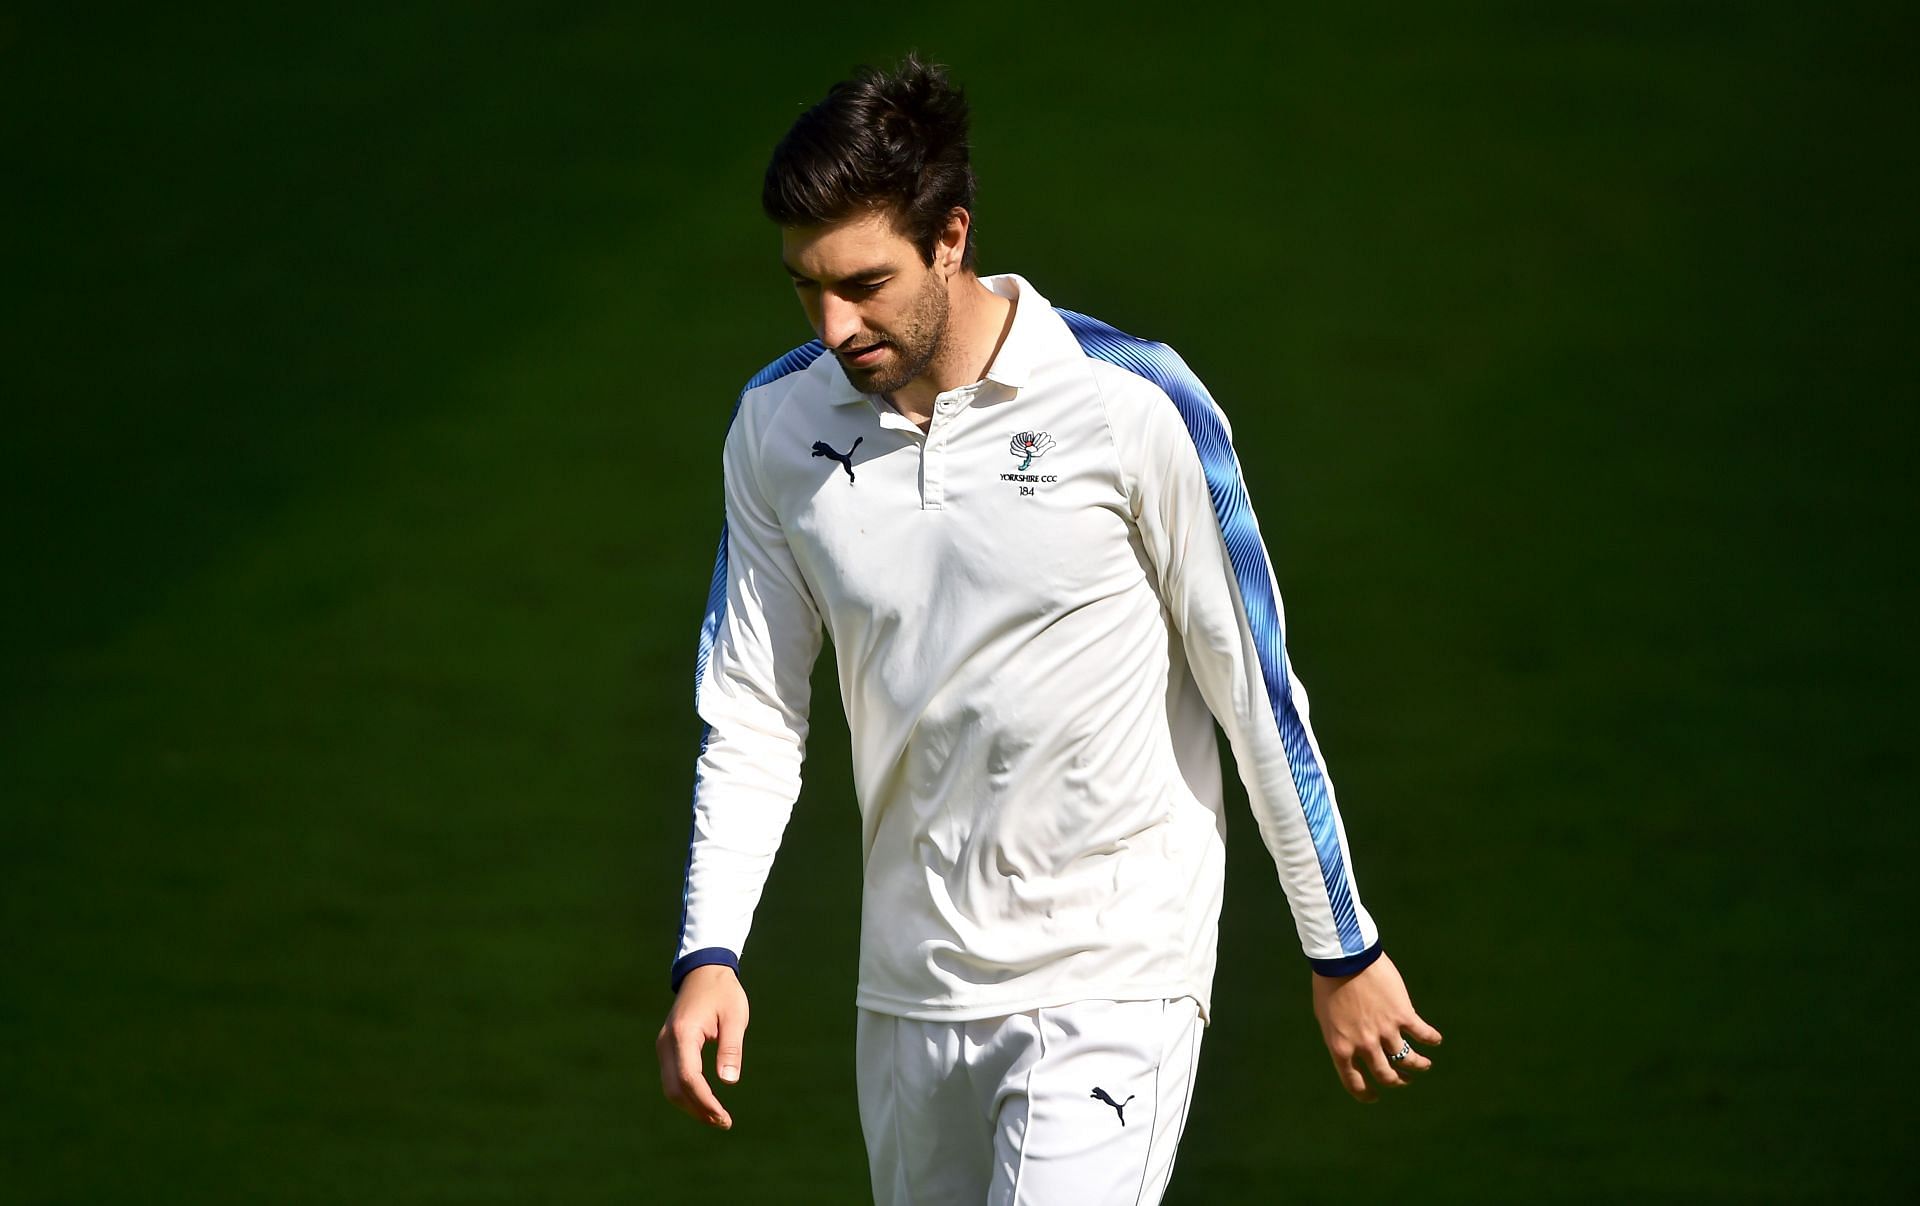 Duanne Olivier was not in the playing XI for the first Test against India